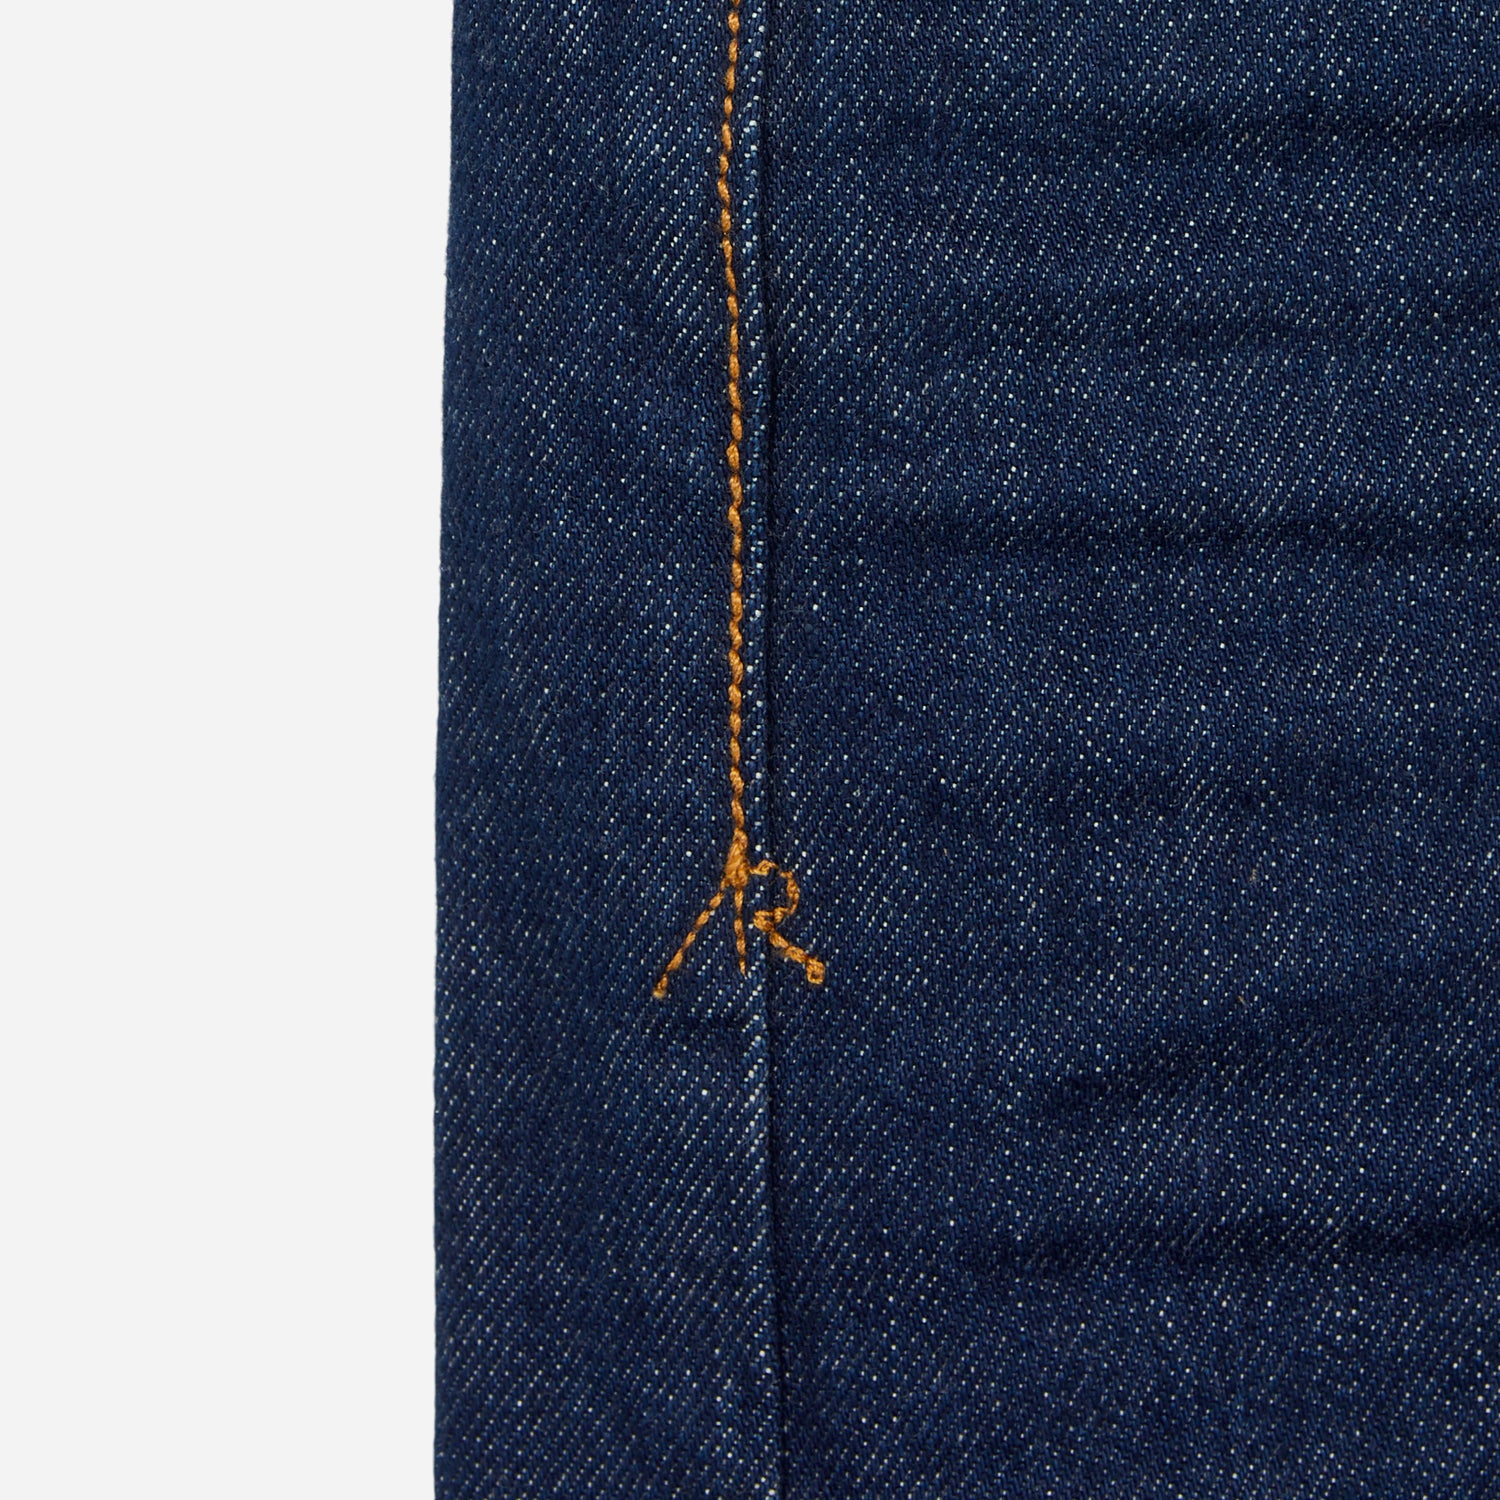 close up of stitching of pair of high quality slim cut men's dark blue jeans with no wear